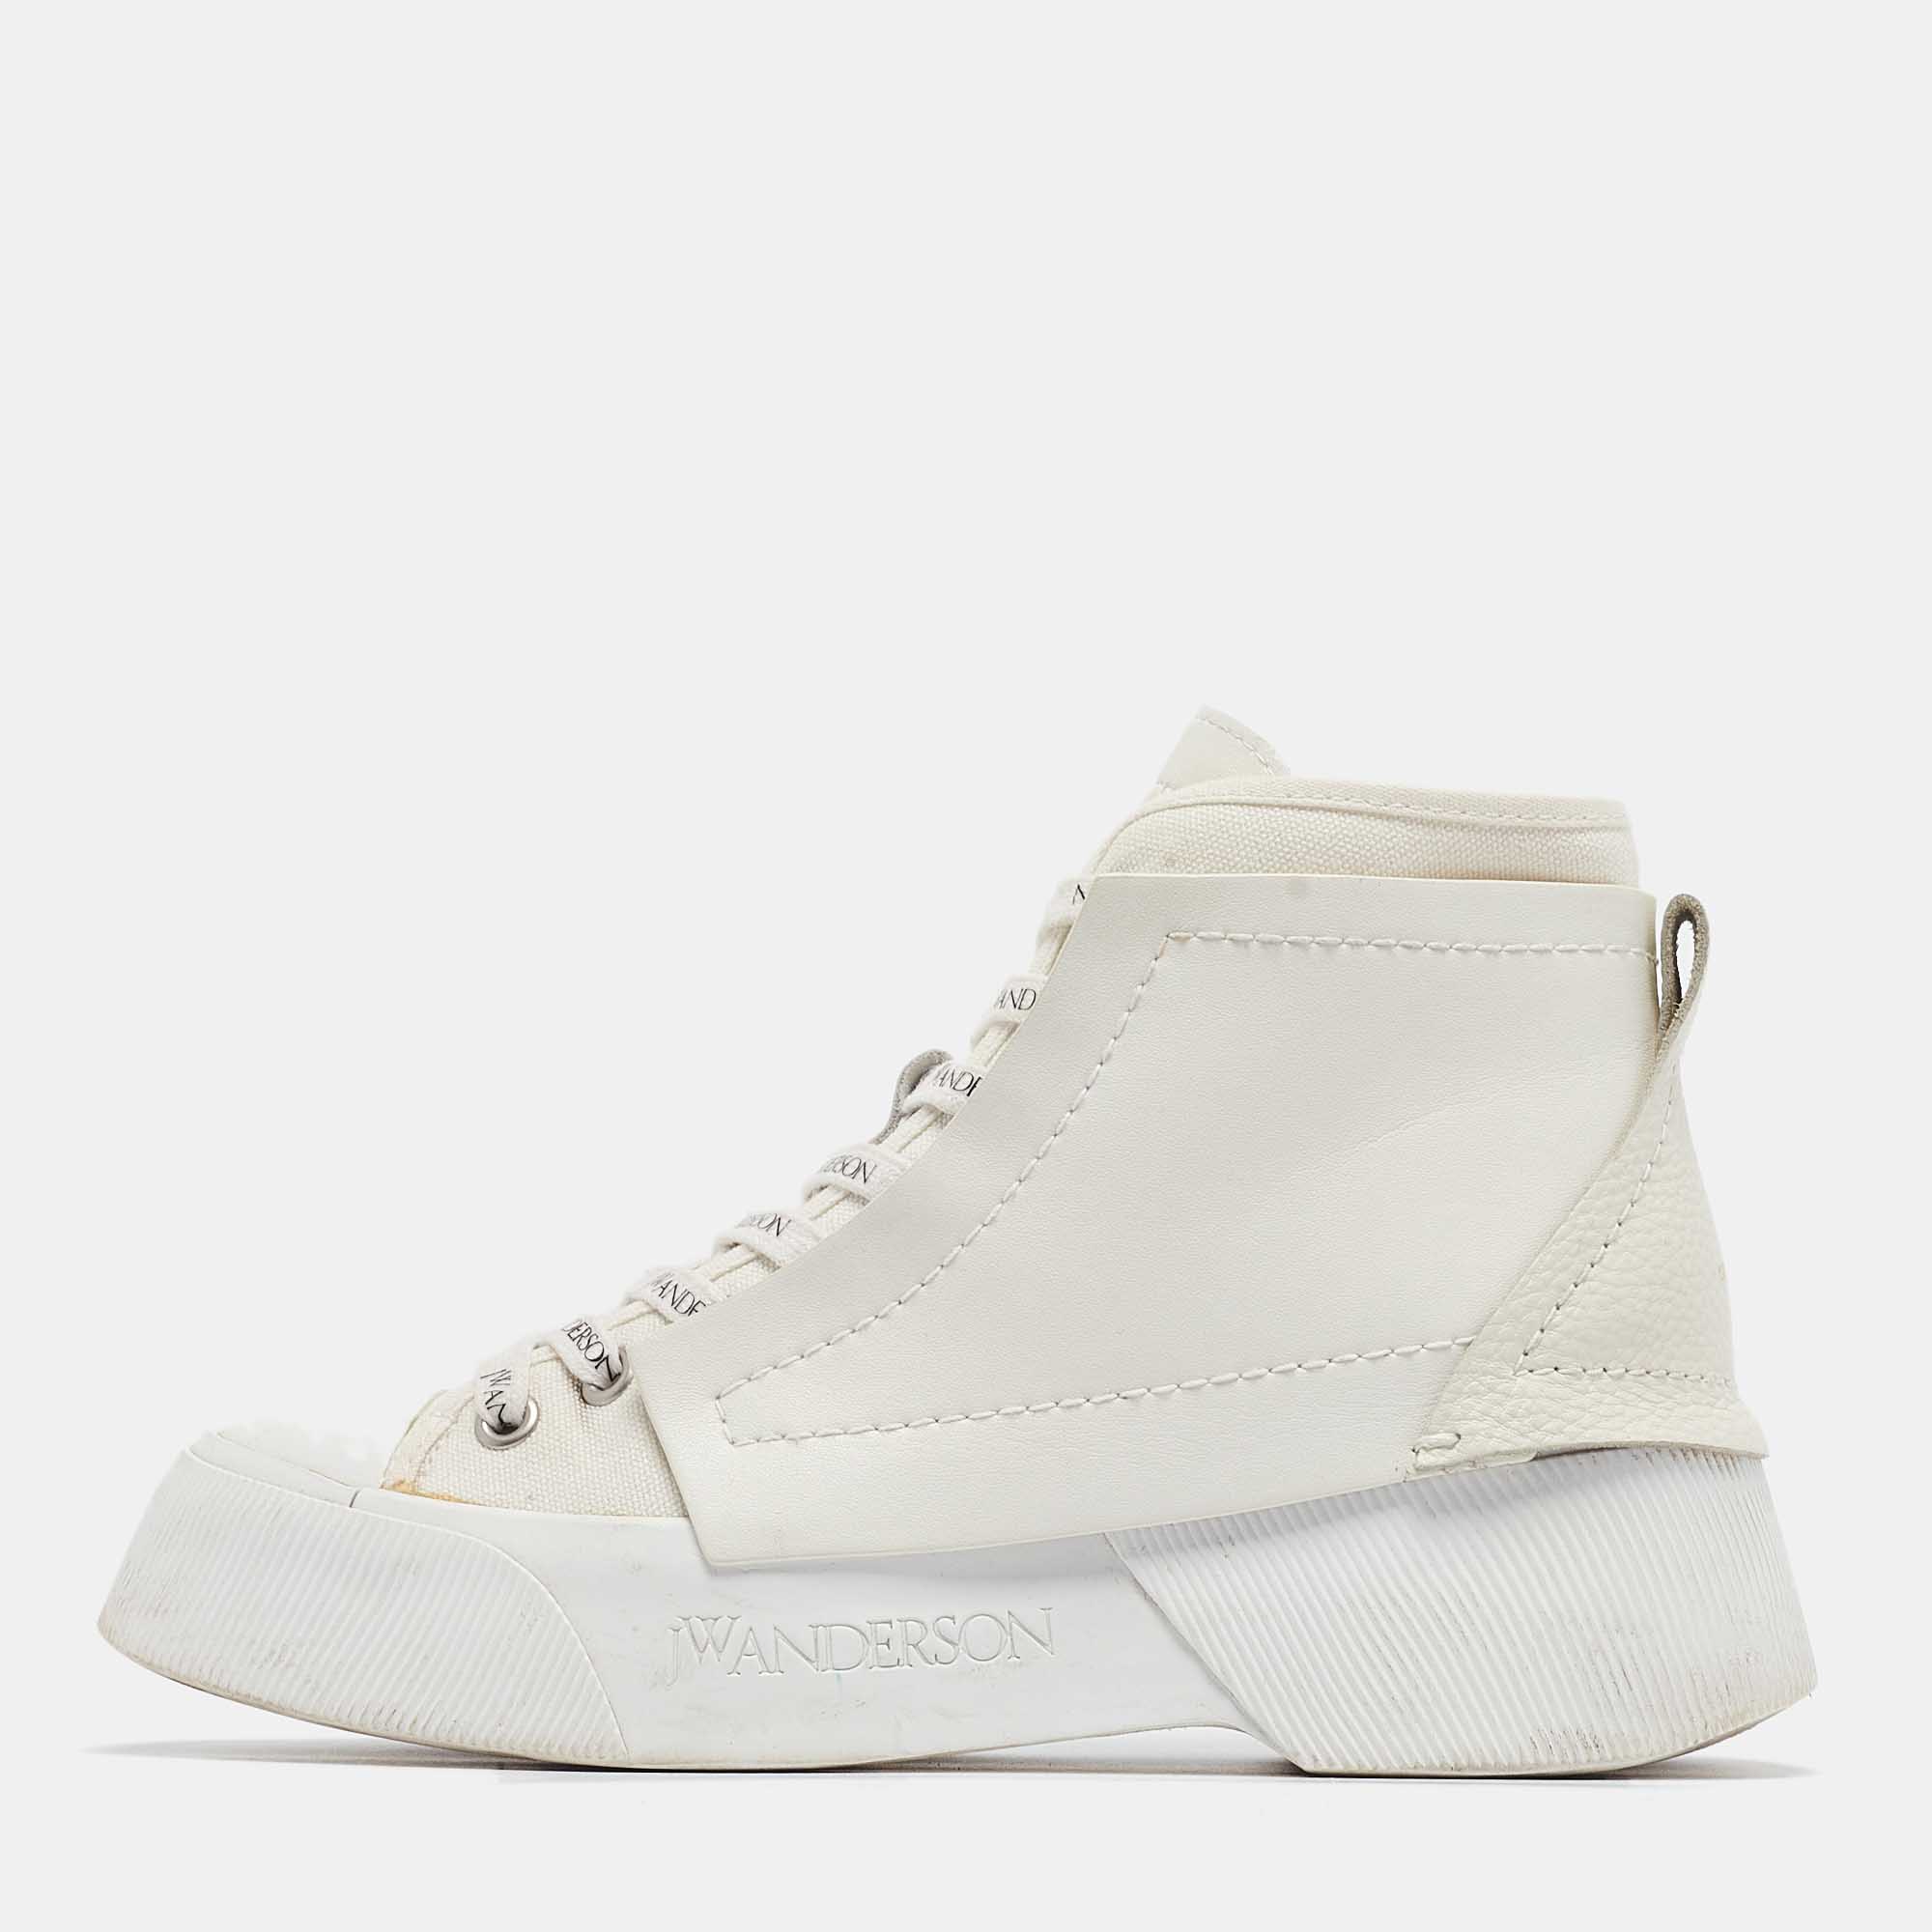 

J.W. Anderson White Canvas and Leather High Top Sneakers Size